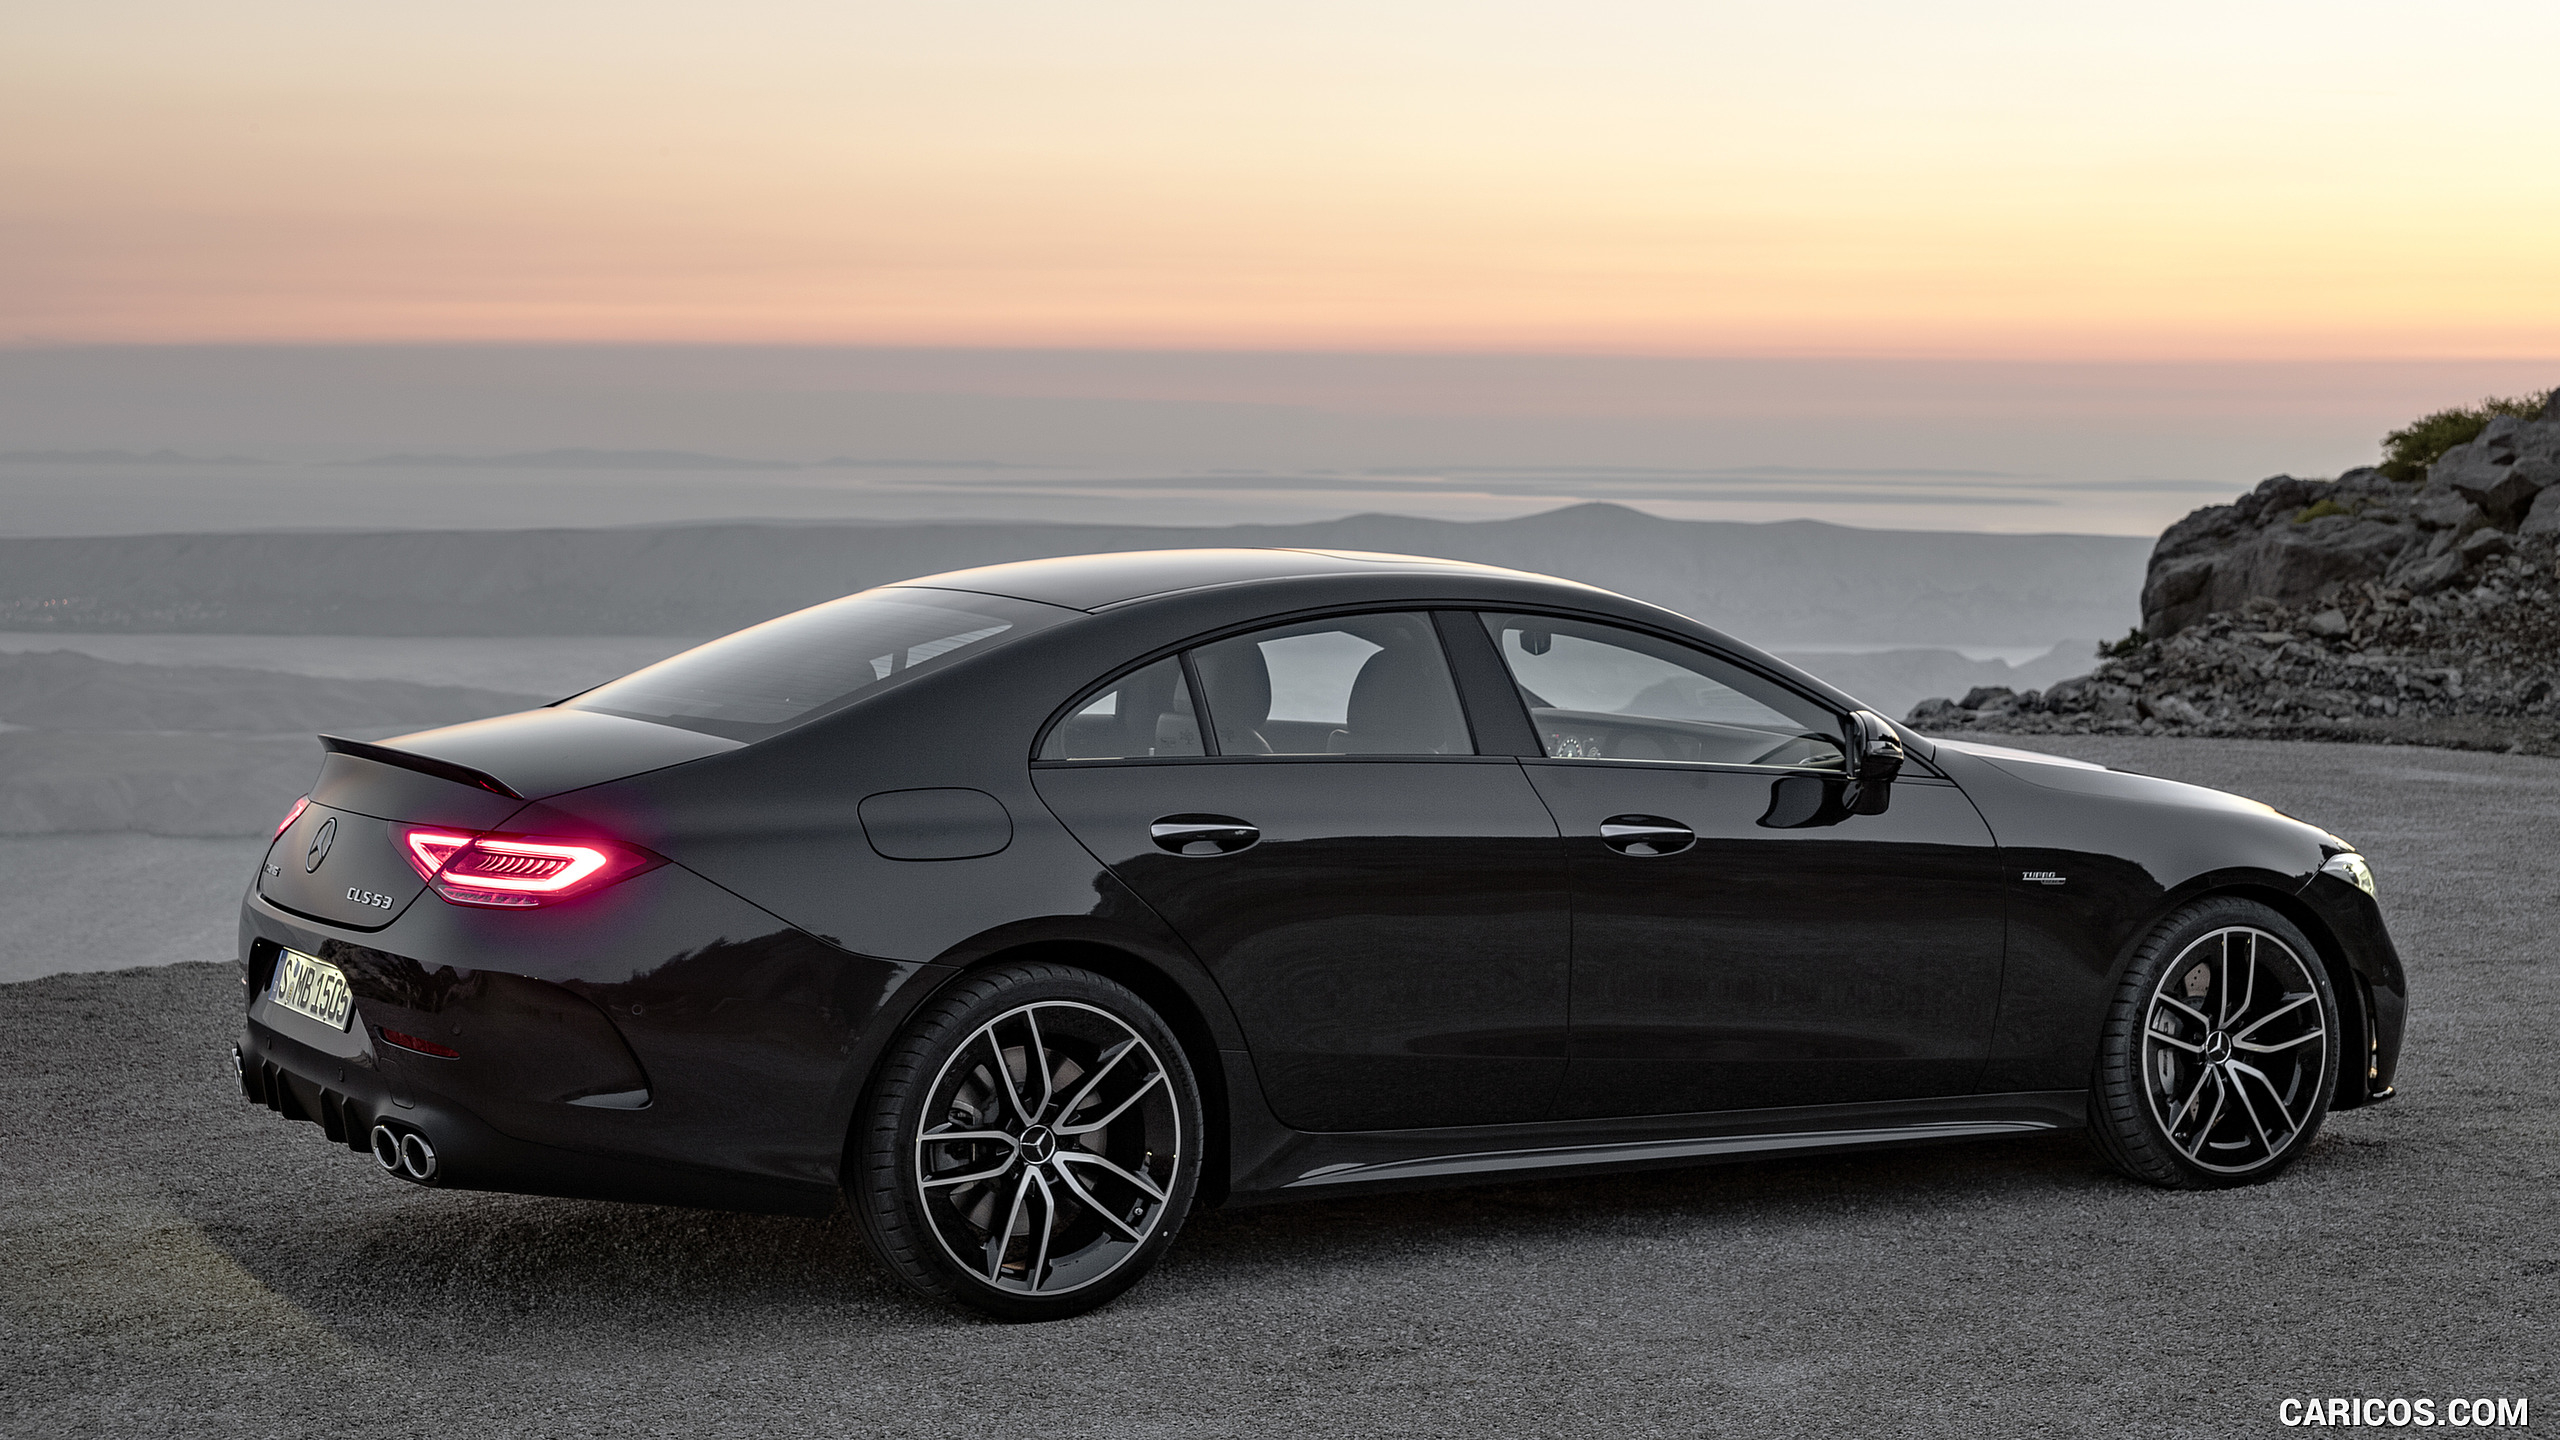 2019 Mercedes-AMG CLS 53 4MATIC+ - Side, #11 of 84